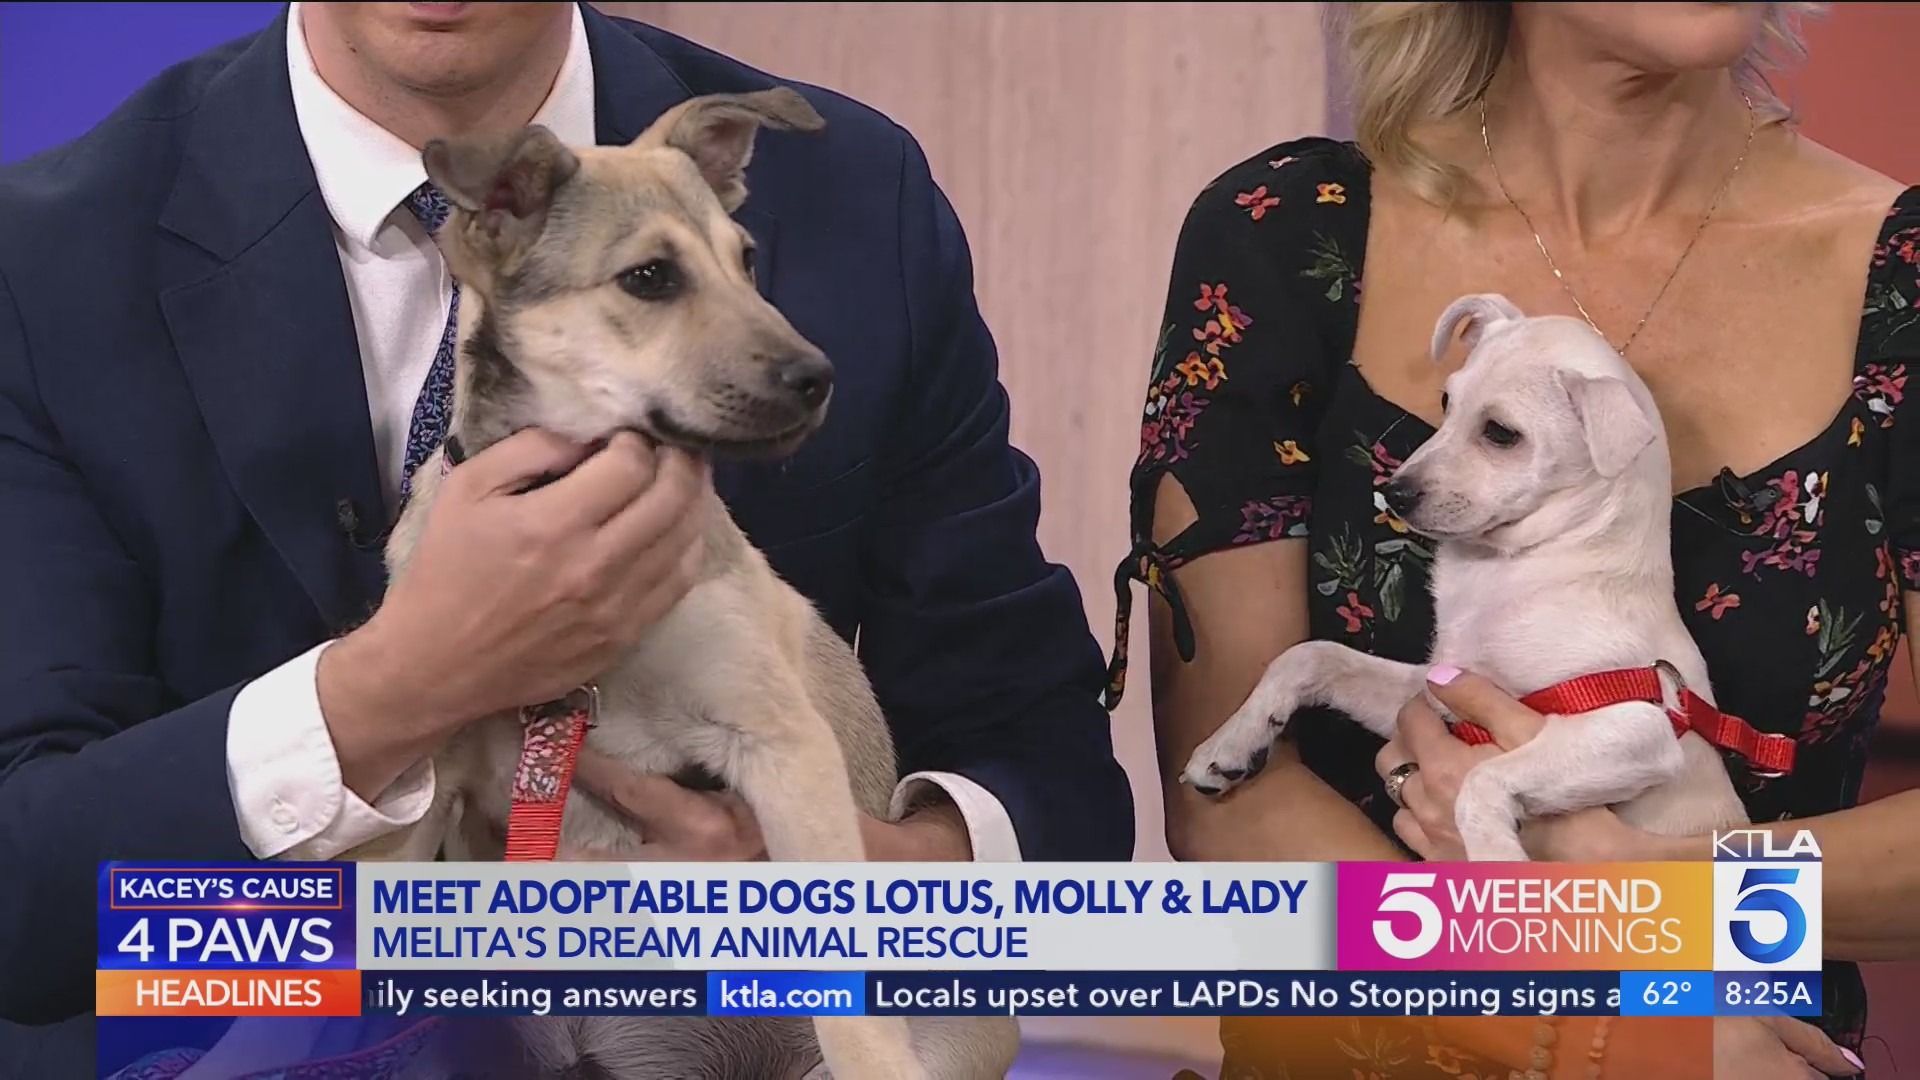 Adoptable dog trio from Melita's Dream Animal Rescue looking for forever homes